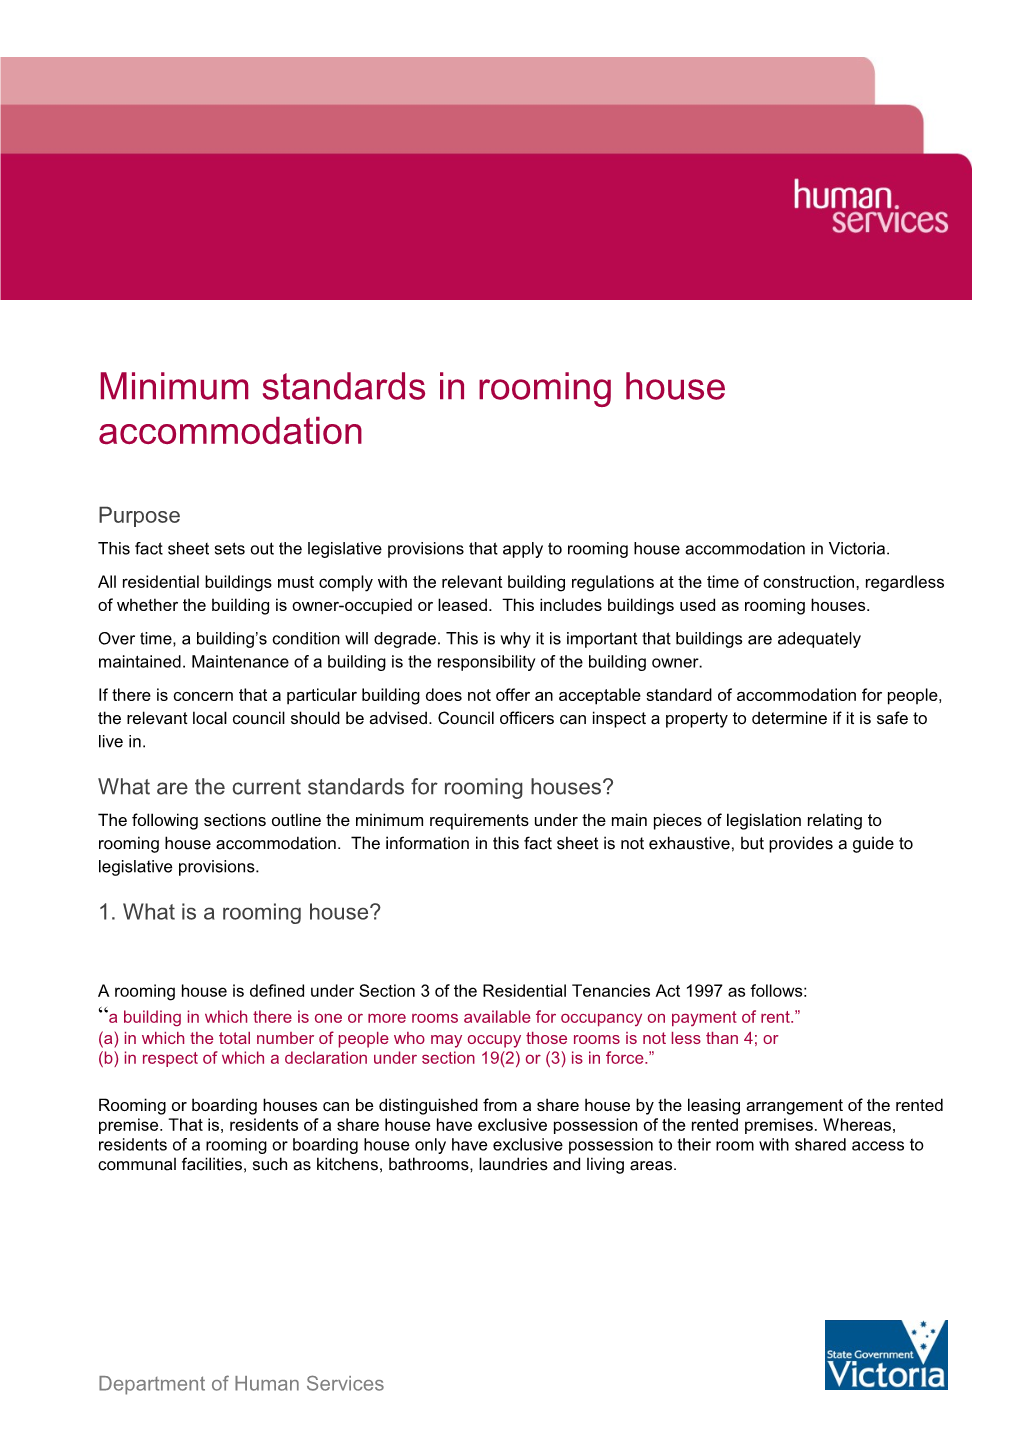 Minimum Standards in Rooming House Accommodation